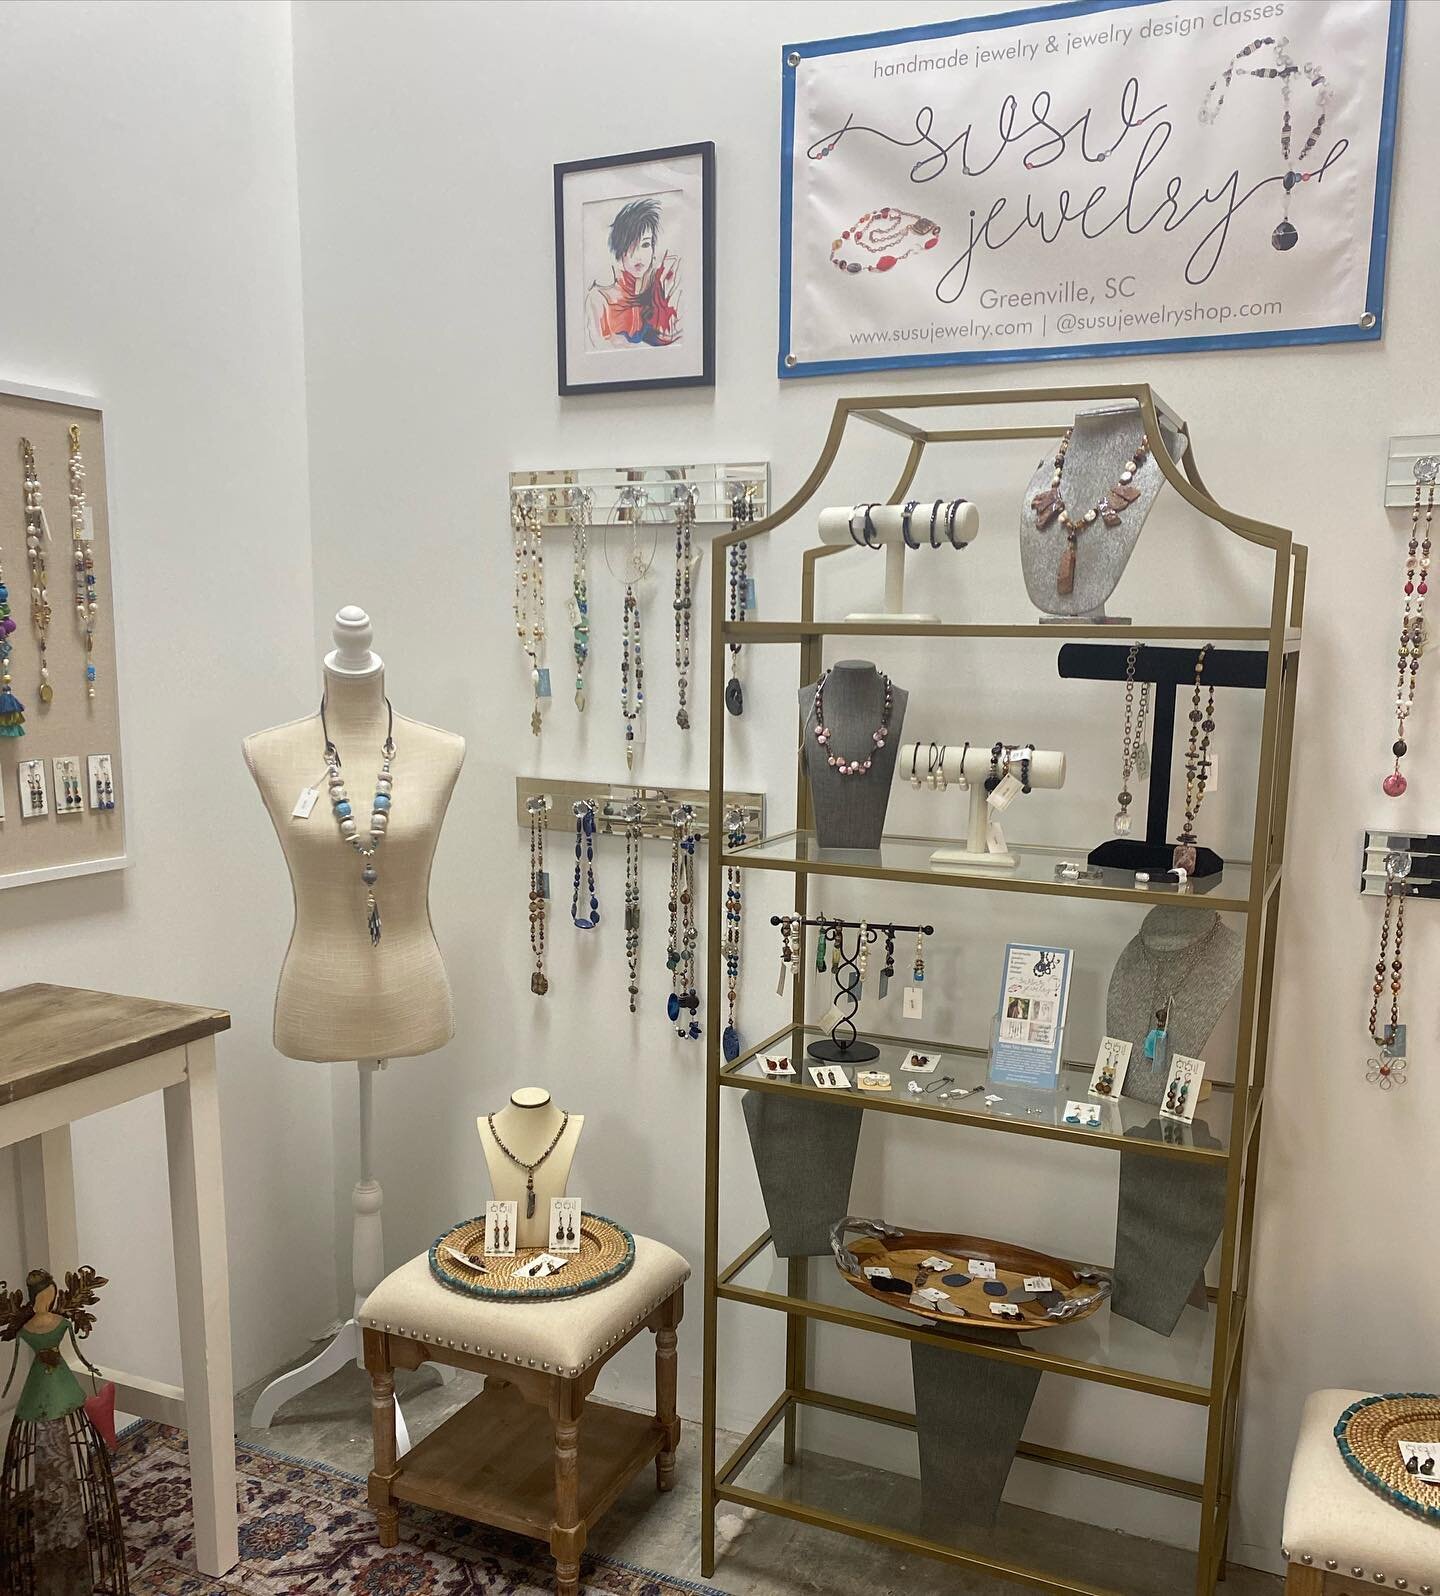 Come see me at Westside Market @westsidemarketgreenvillesc today! I&rsquo;ll be making jewelry designs in my booth and you can choose your beads to create a special necklace of your own! 

3501 Augusta Road

#shopgvl #westsidemarketgreenville #jewelr